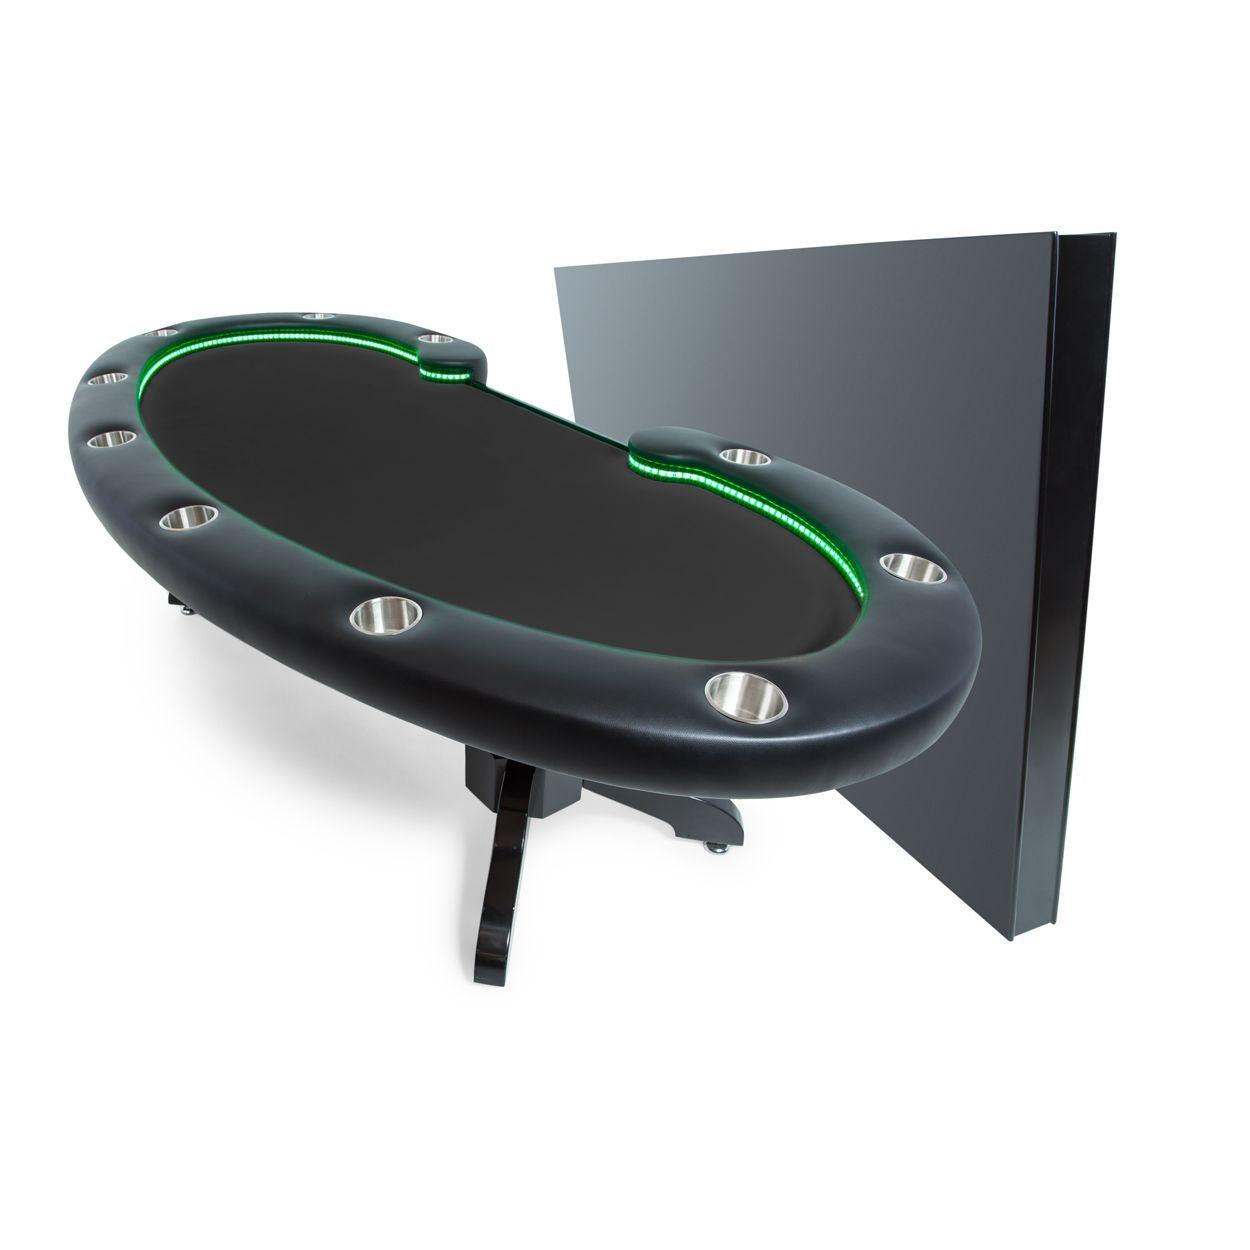 Poker Table With LED Lights – The Lumen HD by BBO-AMERICANA-POKER-TABLES